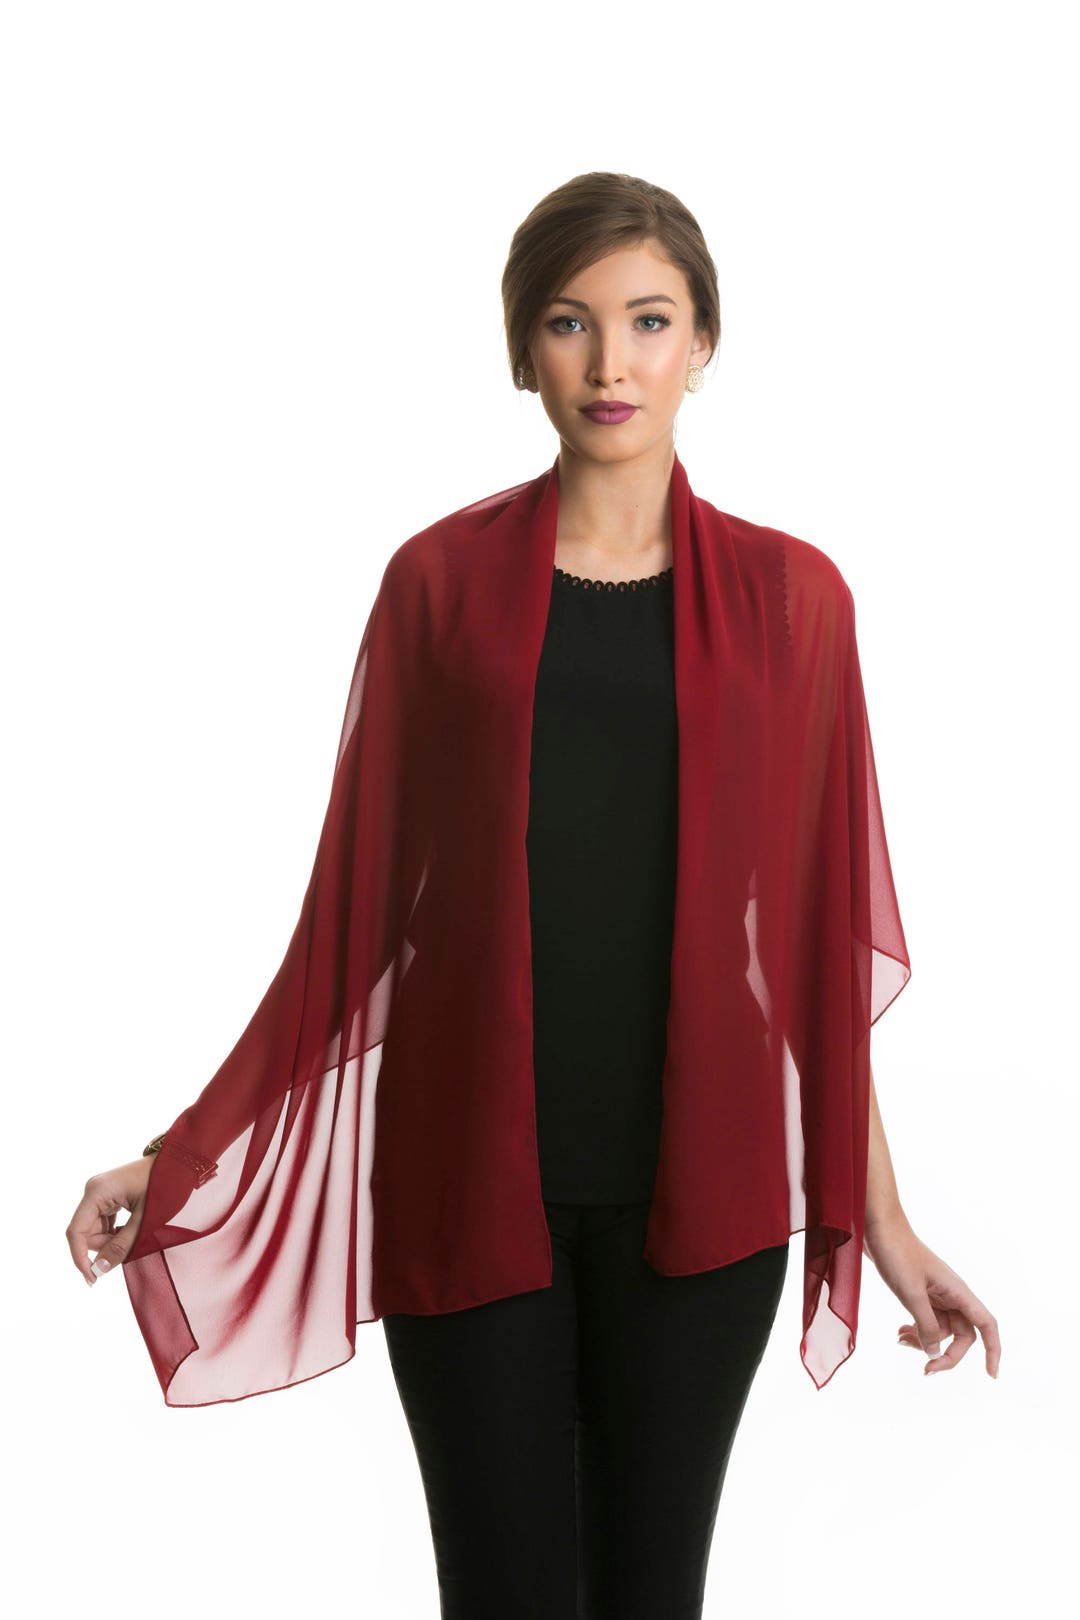 Red Chiffon Wrap Over-sized Scarf Cover Up - Etsy